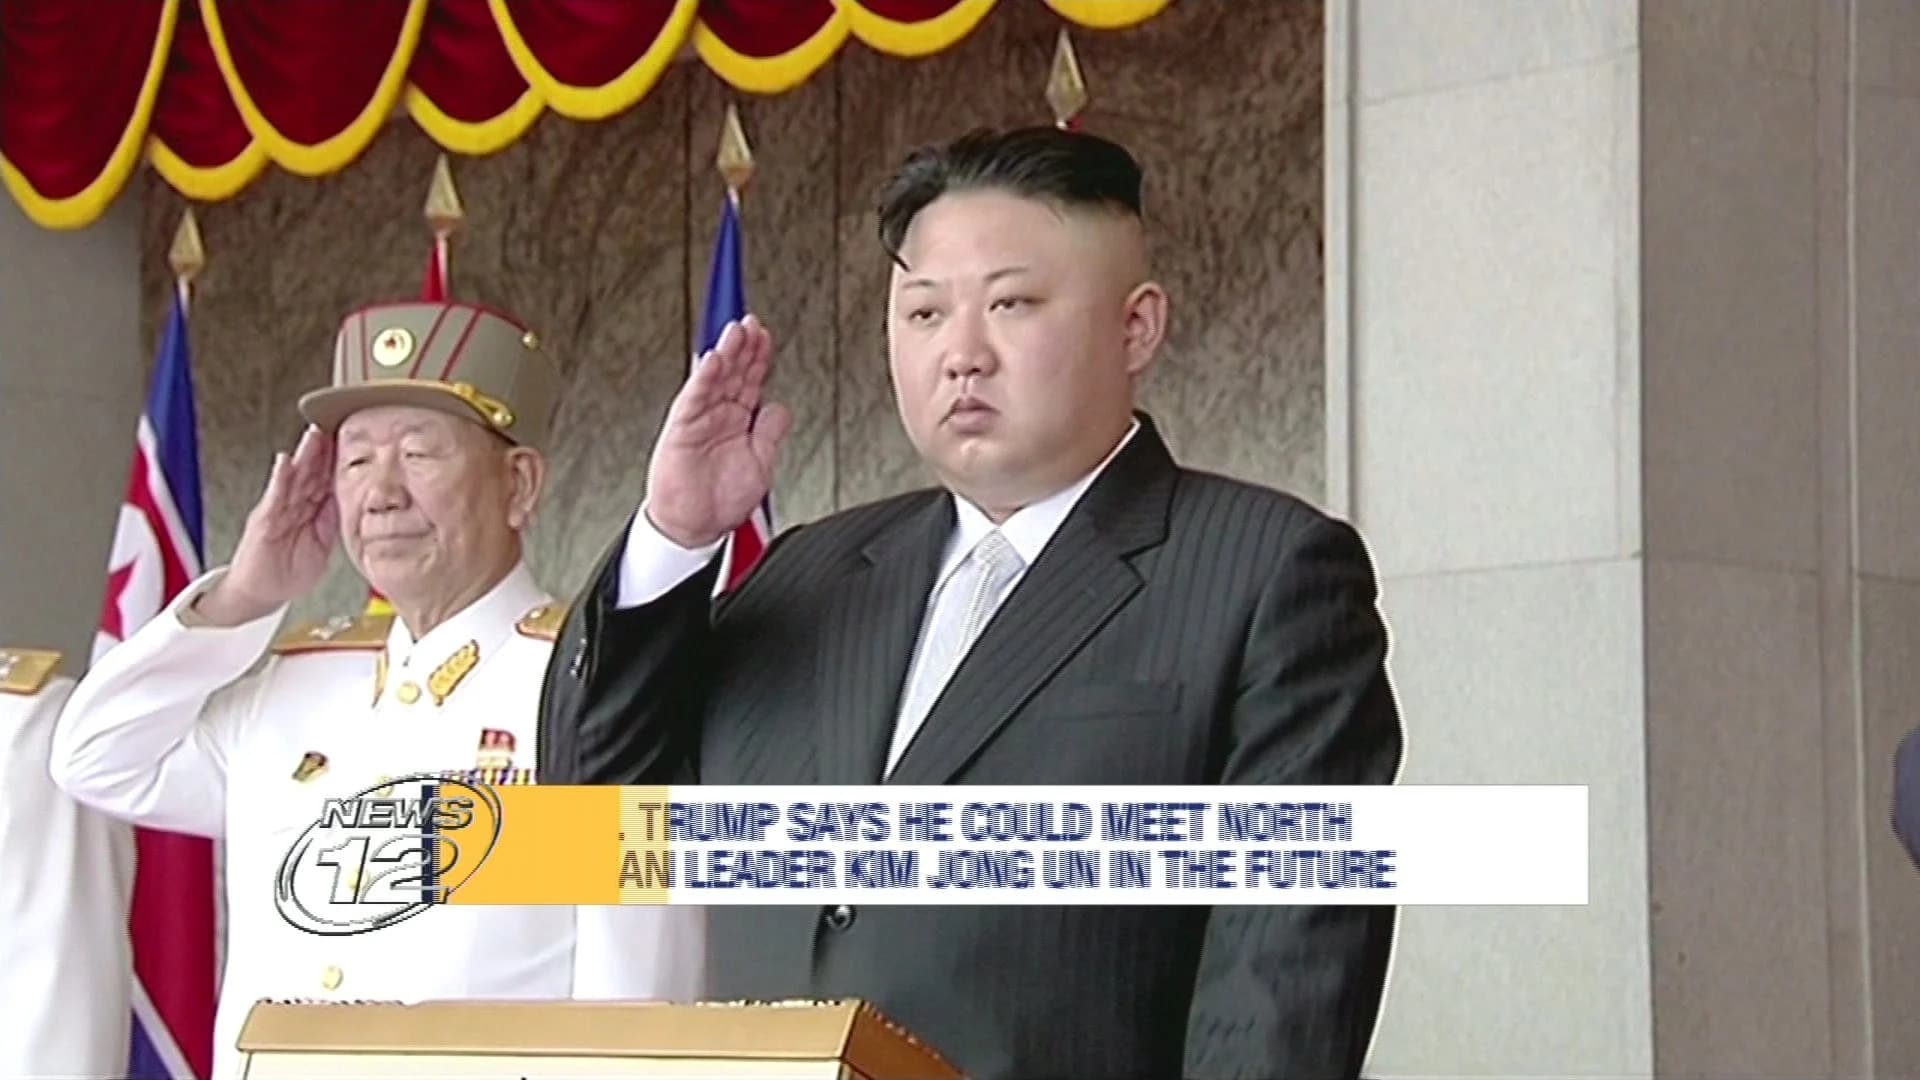 Trump: Would be "honored" to meet with Kim Jong Un